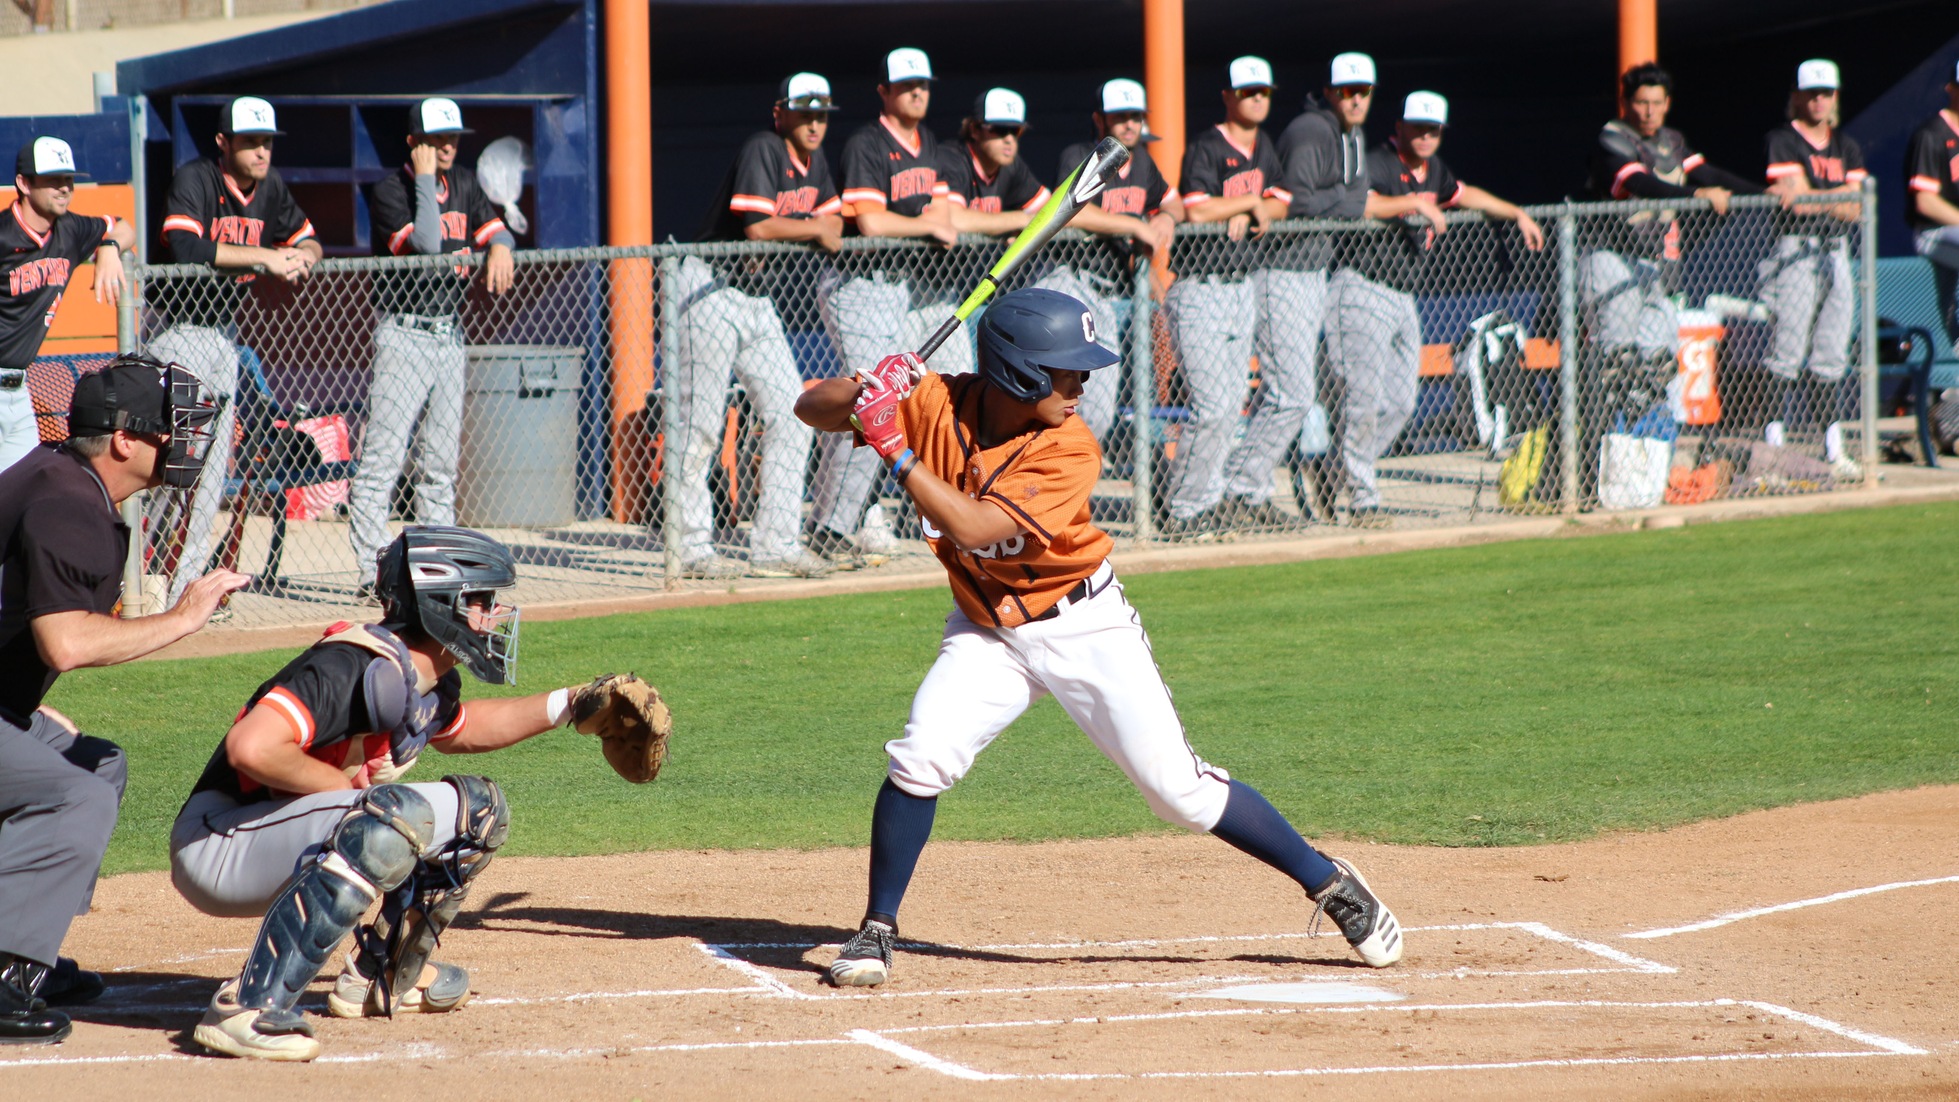 Go Hattori goes 3-for-4 at the plate against Cypress. Photo by: Brian Cone